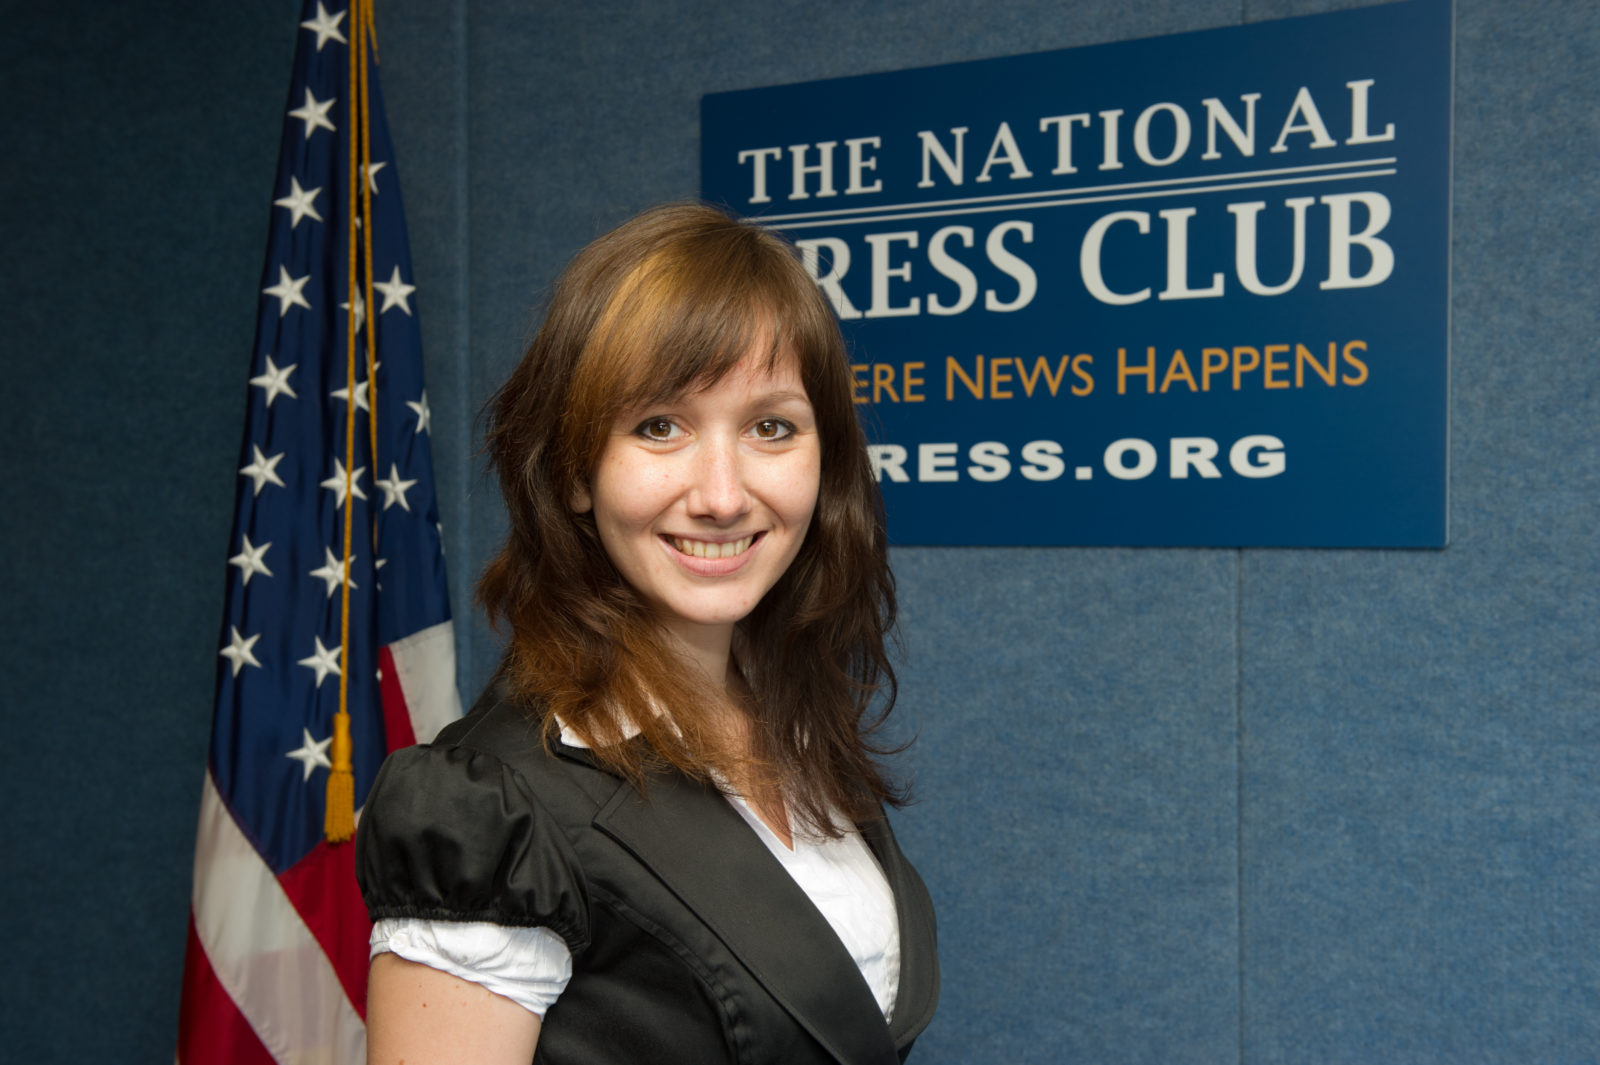 2011 IPJ student Katerina Mestanova takes in the atmosphere of the Press Club during the reception.